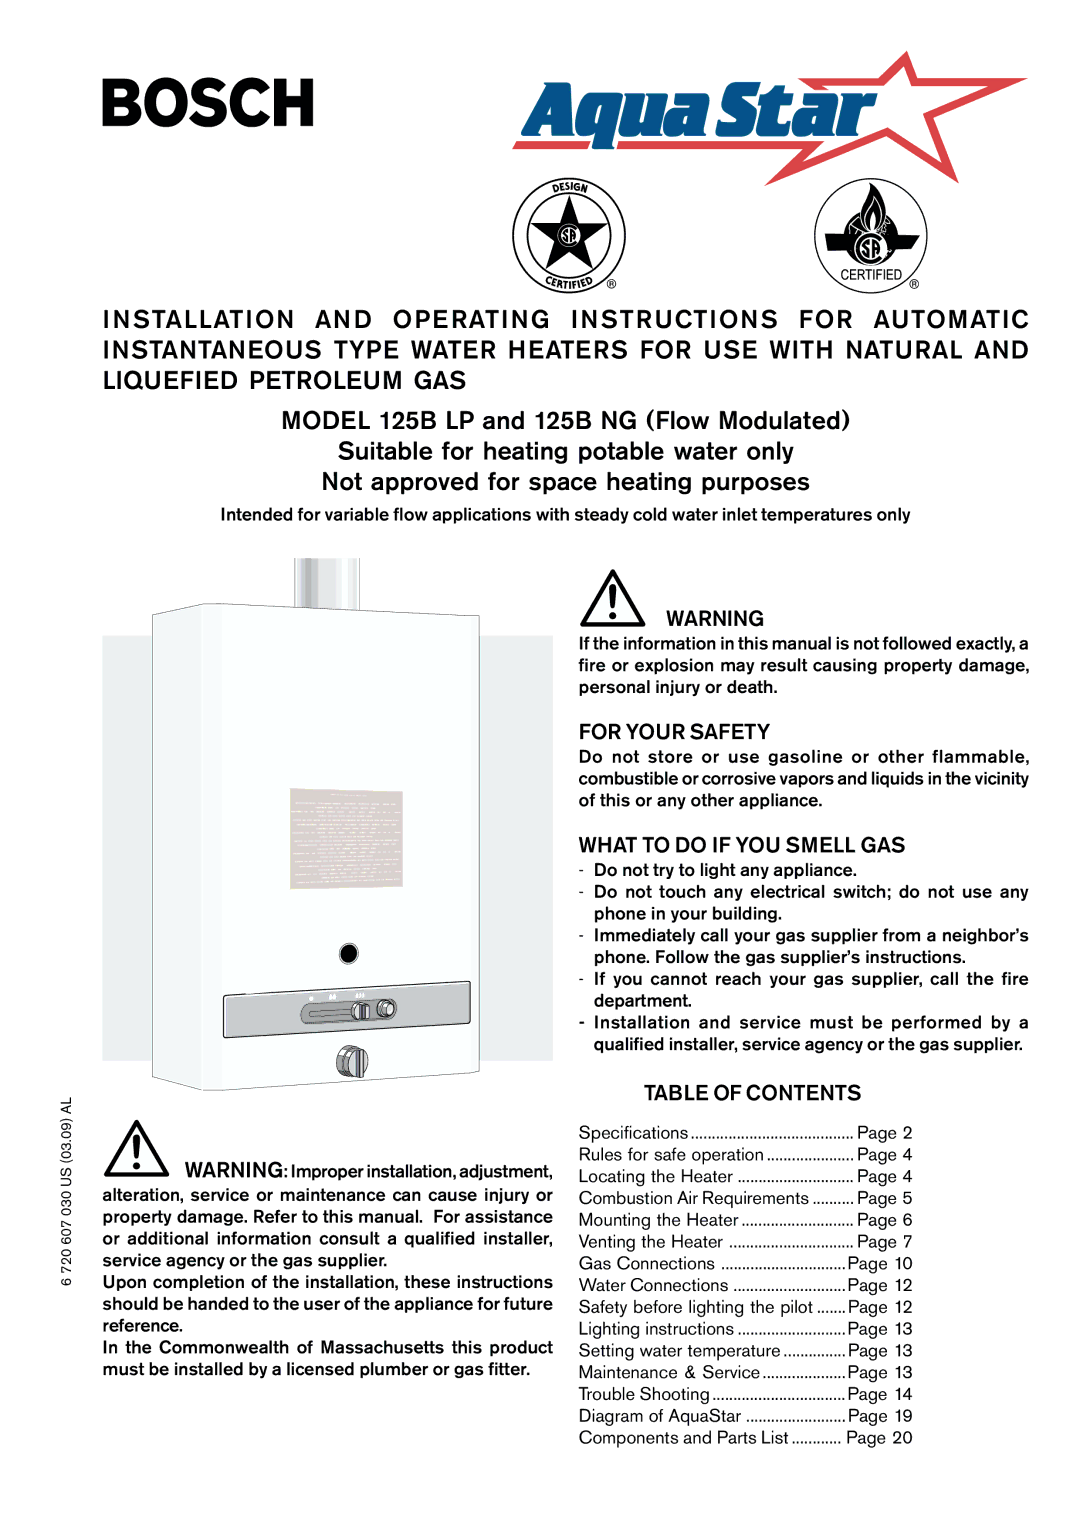 Bosch Appliances 125B LP, 125B NG specifications For Your Safety, What to do if YOU Smell GAS, Table of Contents 